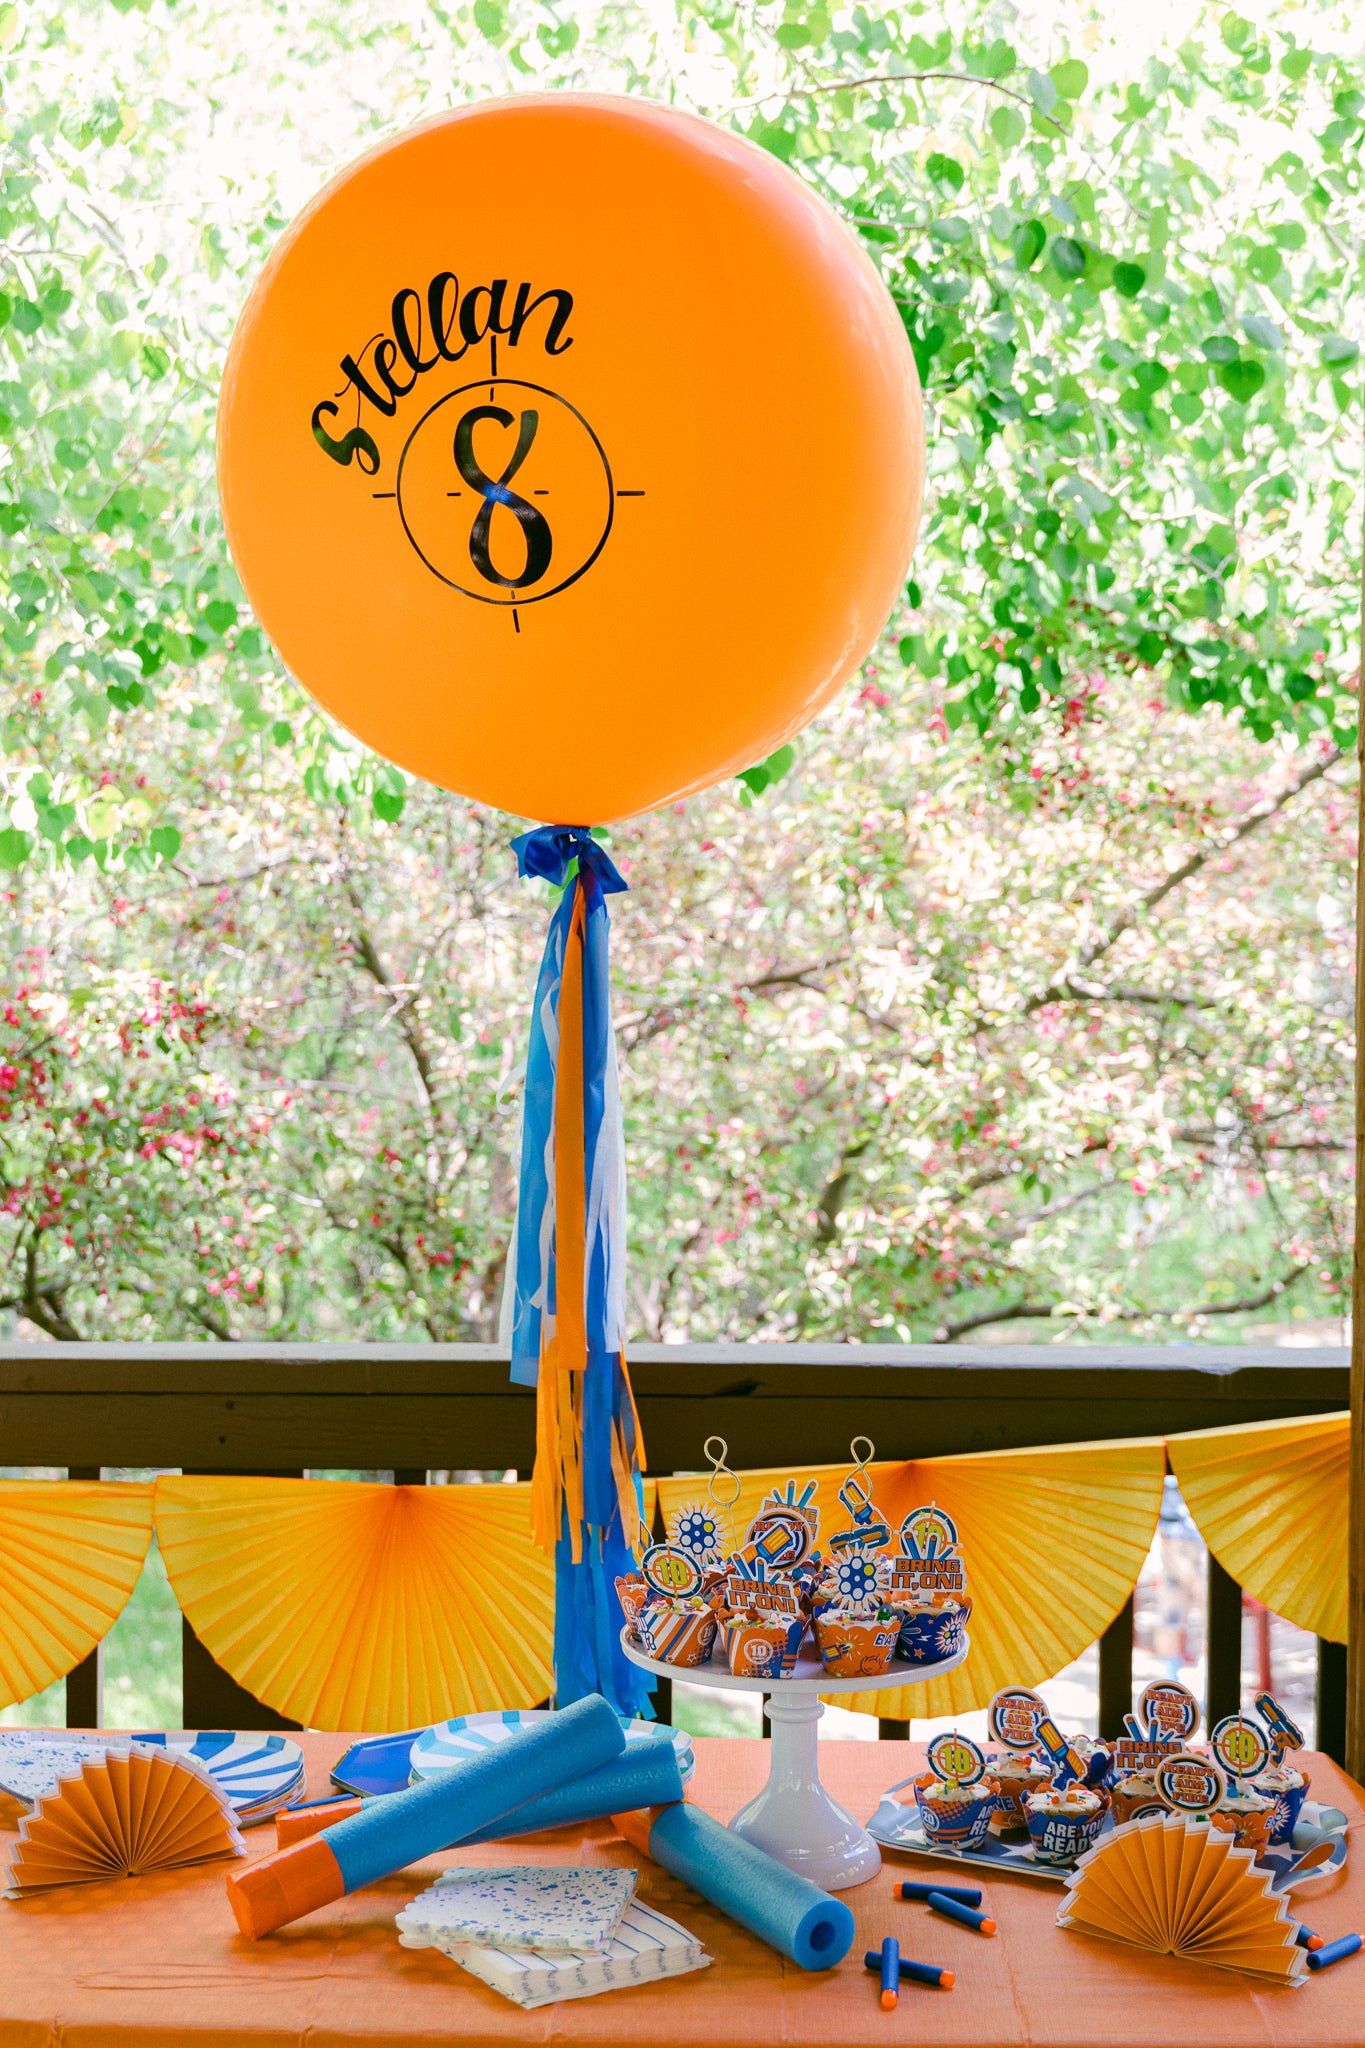 Nerf birthday party ideas using jumbo balloons and orange and blue decorations.